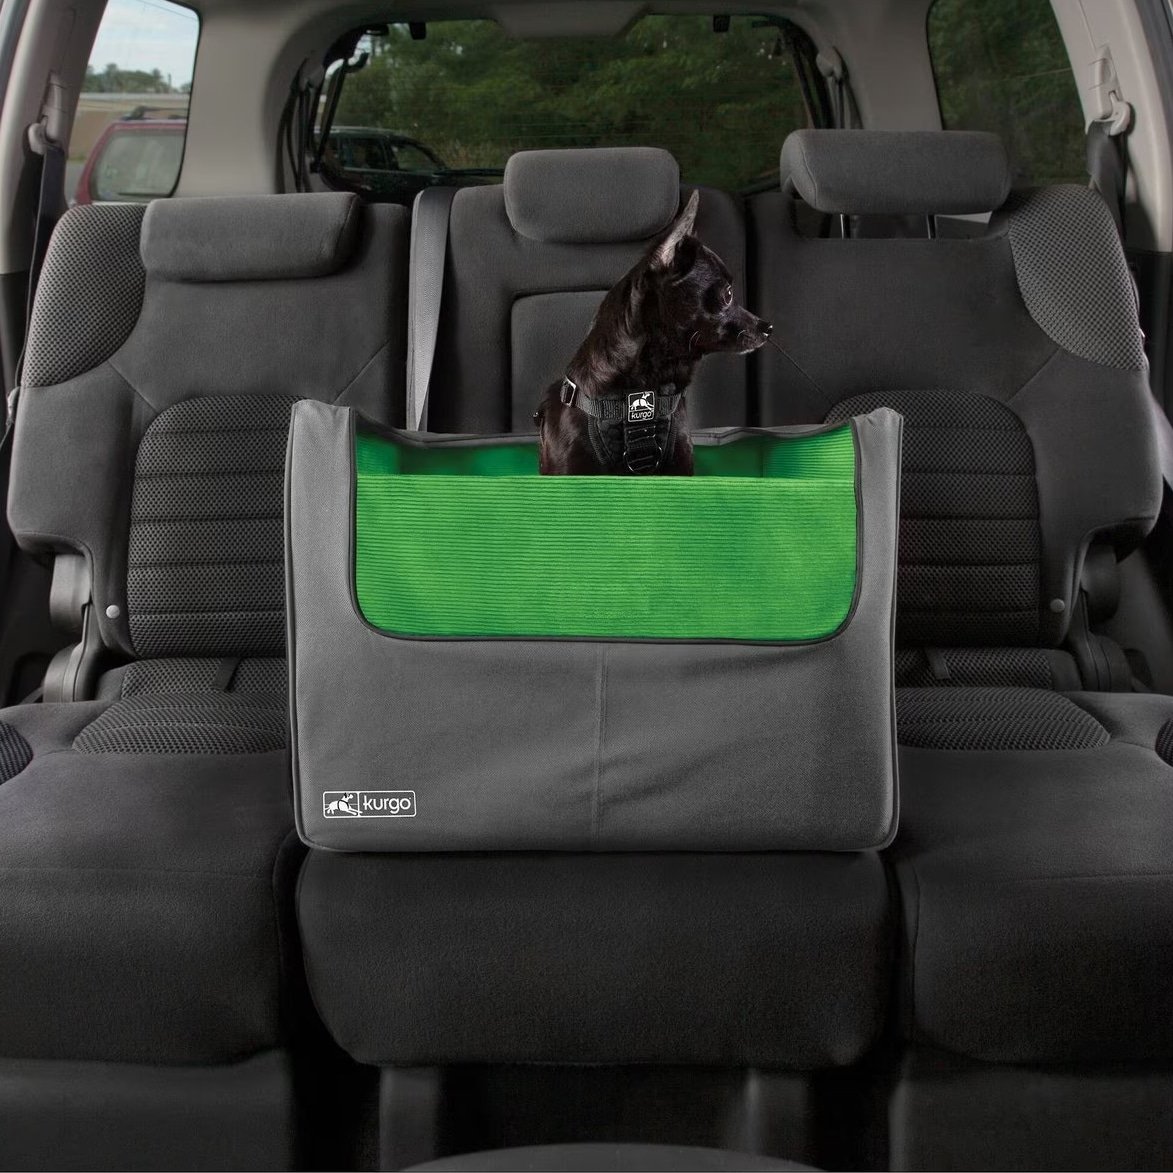 The 10 Best Dog Car Seats and Harnesses for Safe Travels